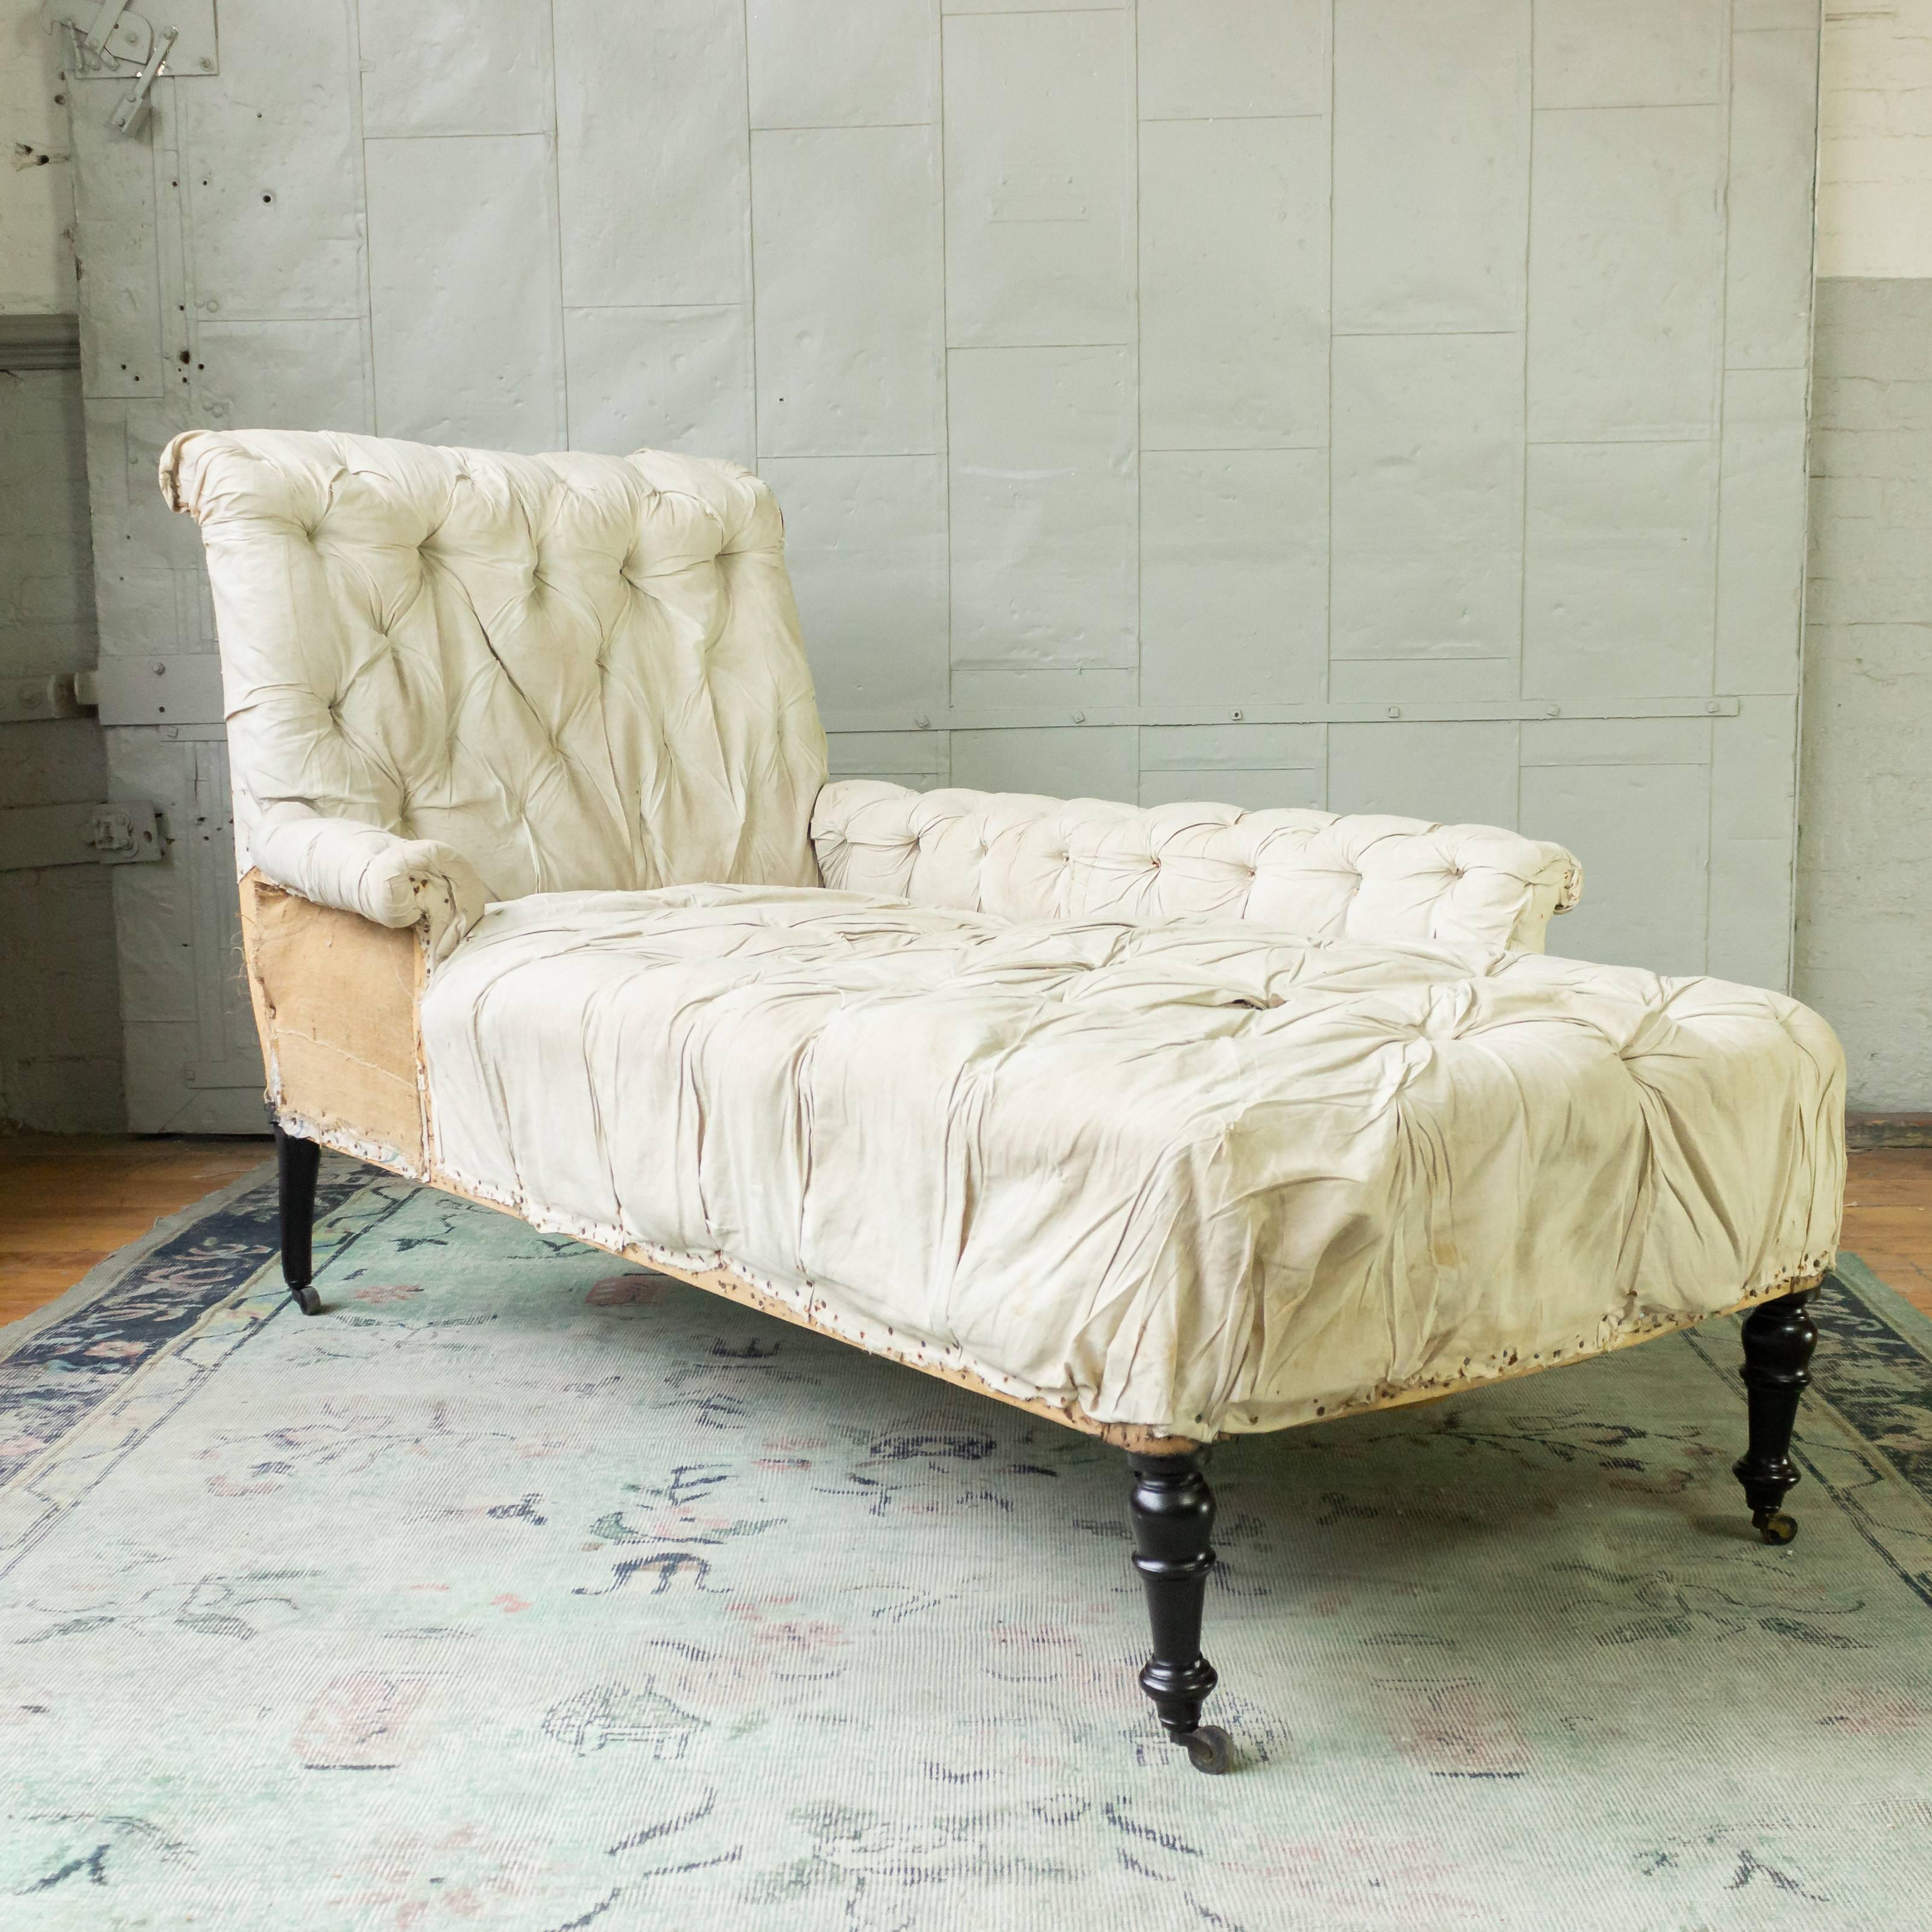 French 19th century Napoleon III tufted chaise longue with a left sided extended arm. The chaise lounge has been stripped down the muslin and is ready for to be upholstered.  


Sold as is